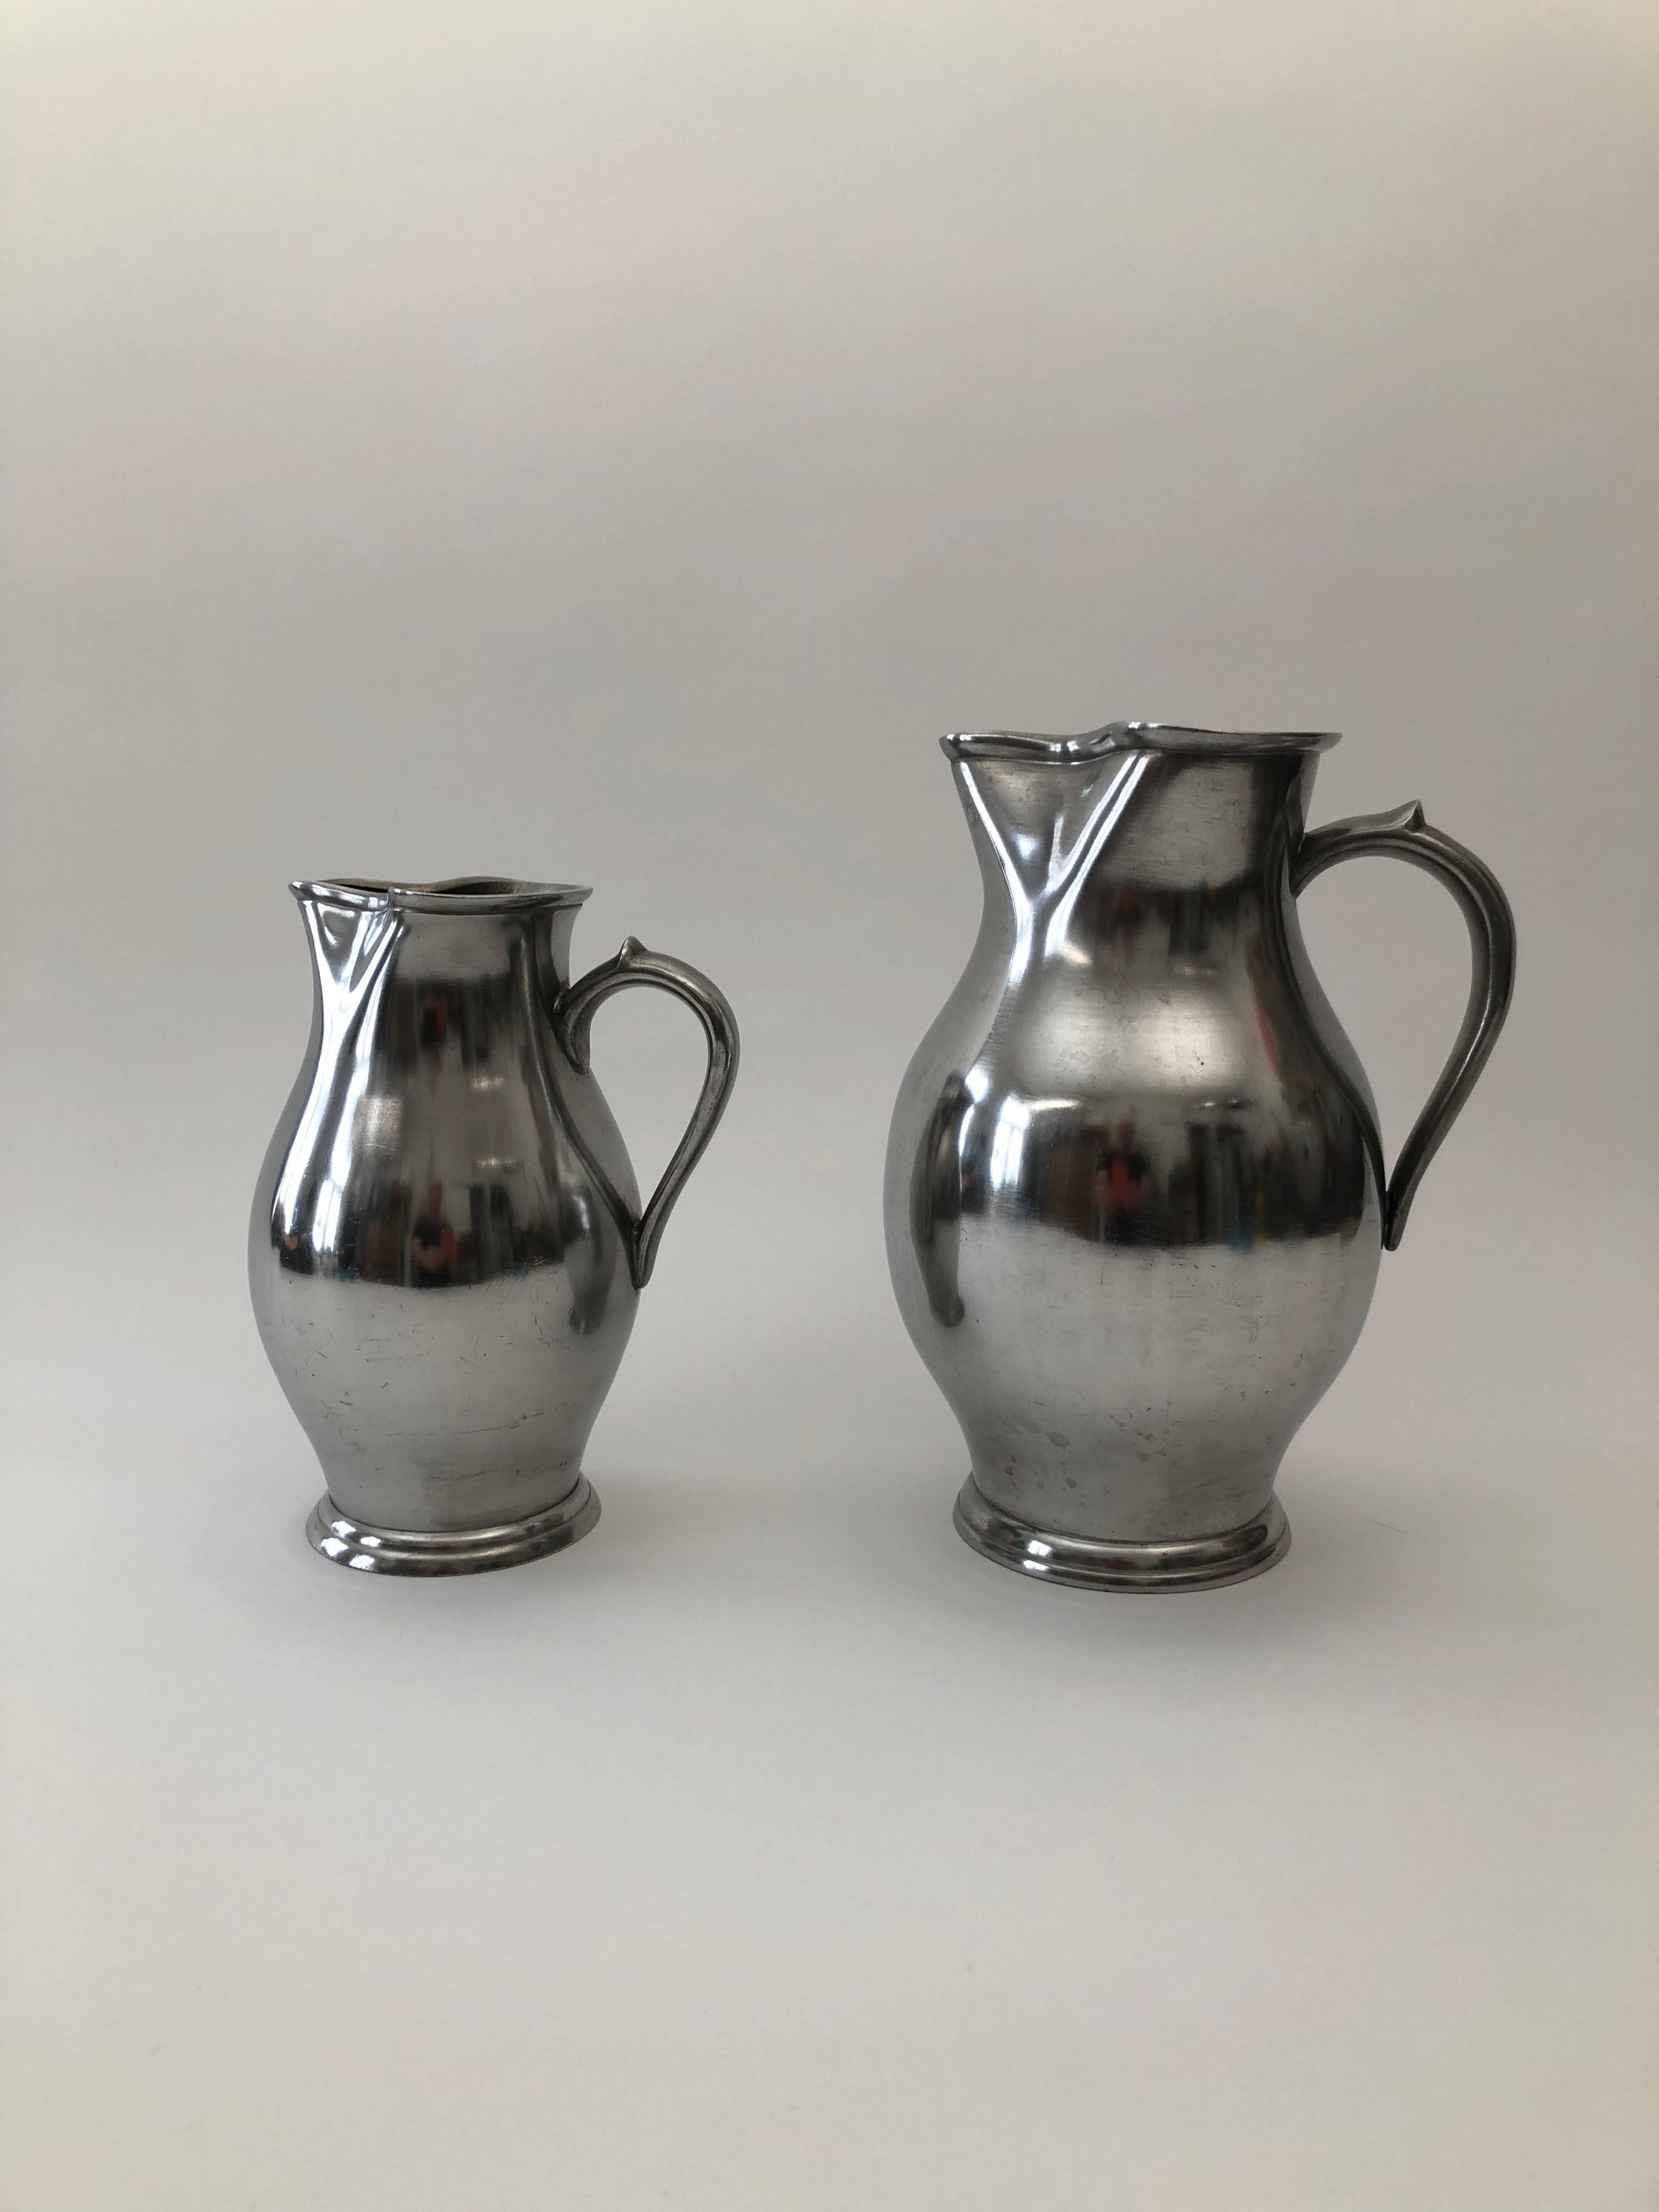 A set of two pewter wine jugs from the Wiener Zin manufacture ,dated 1837. These polished pewter wine jugs exhibit beautiful flowing forms
that emphasis the visual softness of pewter. I have photographed these objects in another setting,